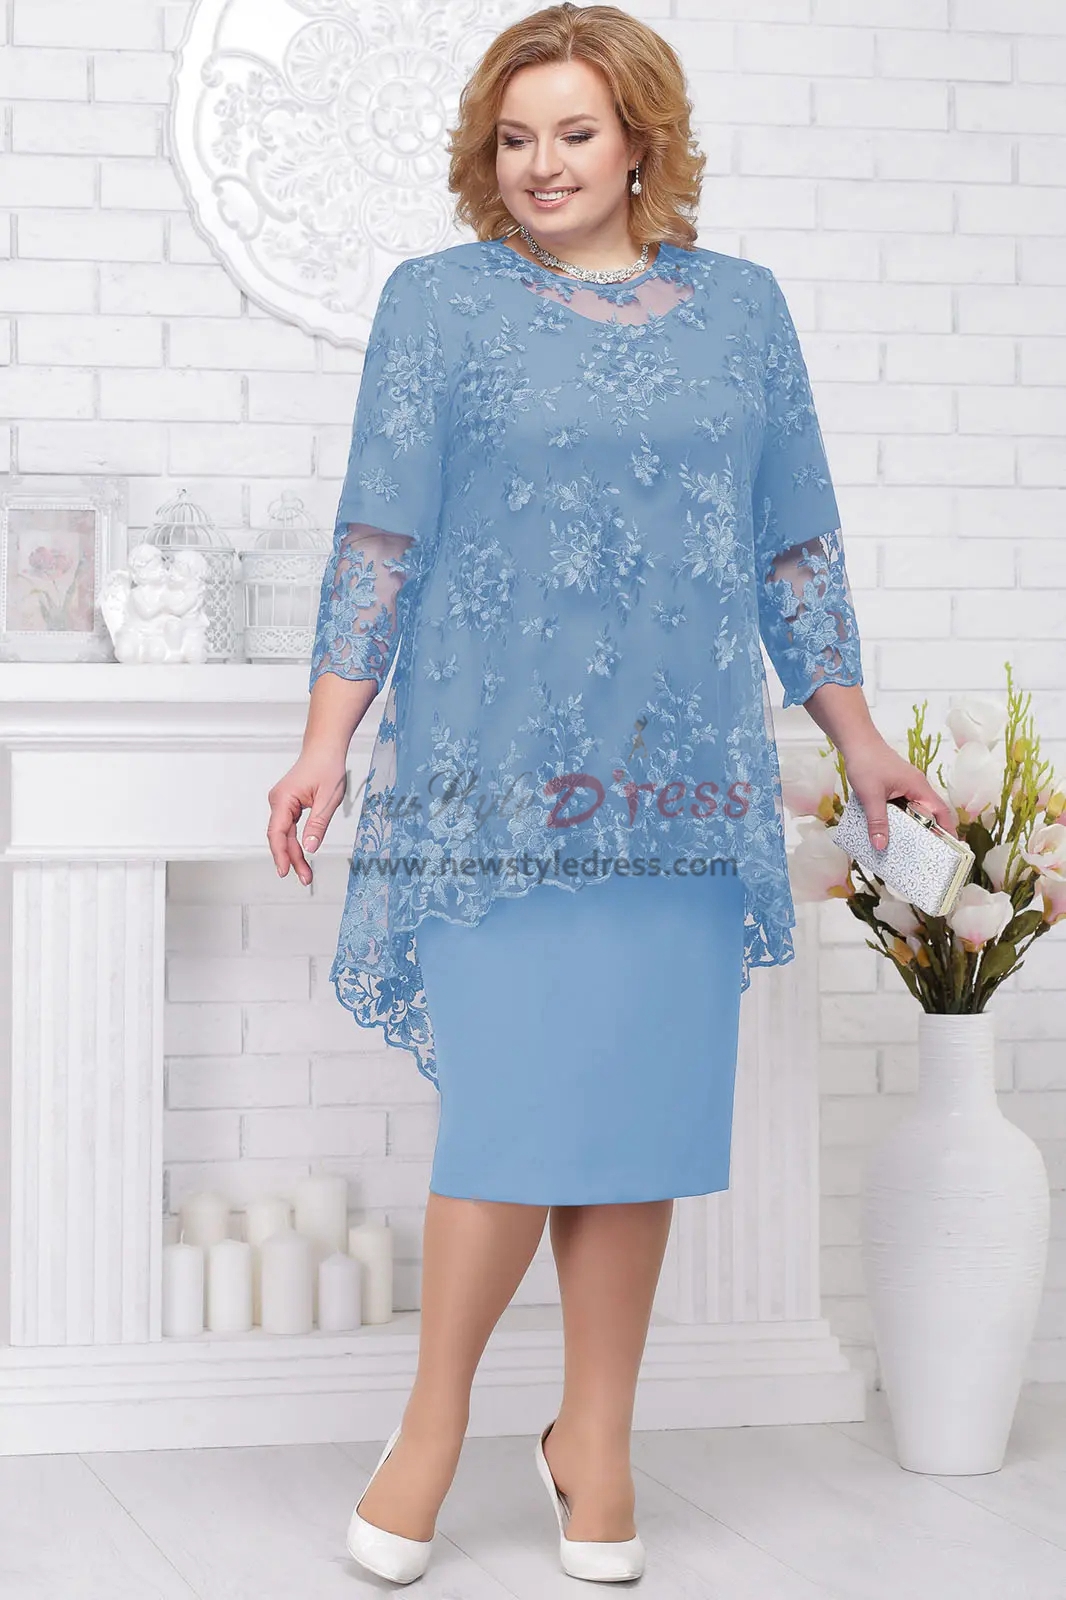 KneeLength Plus size Mother of the bride chiffon dress with lace